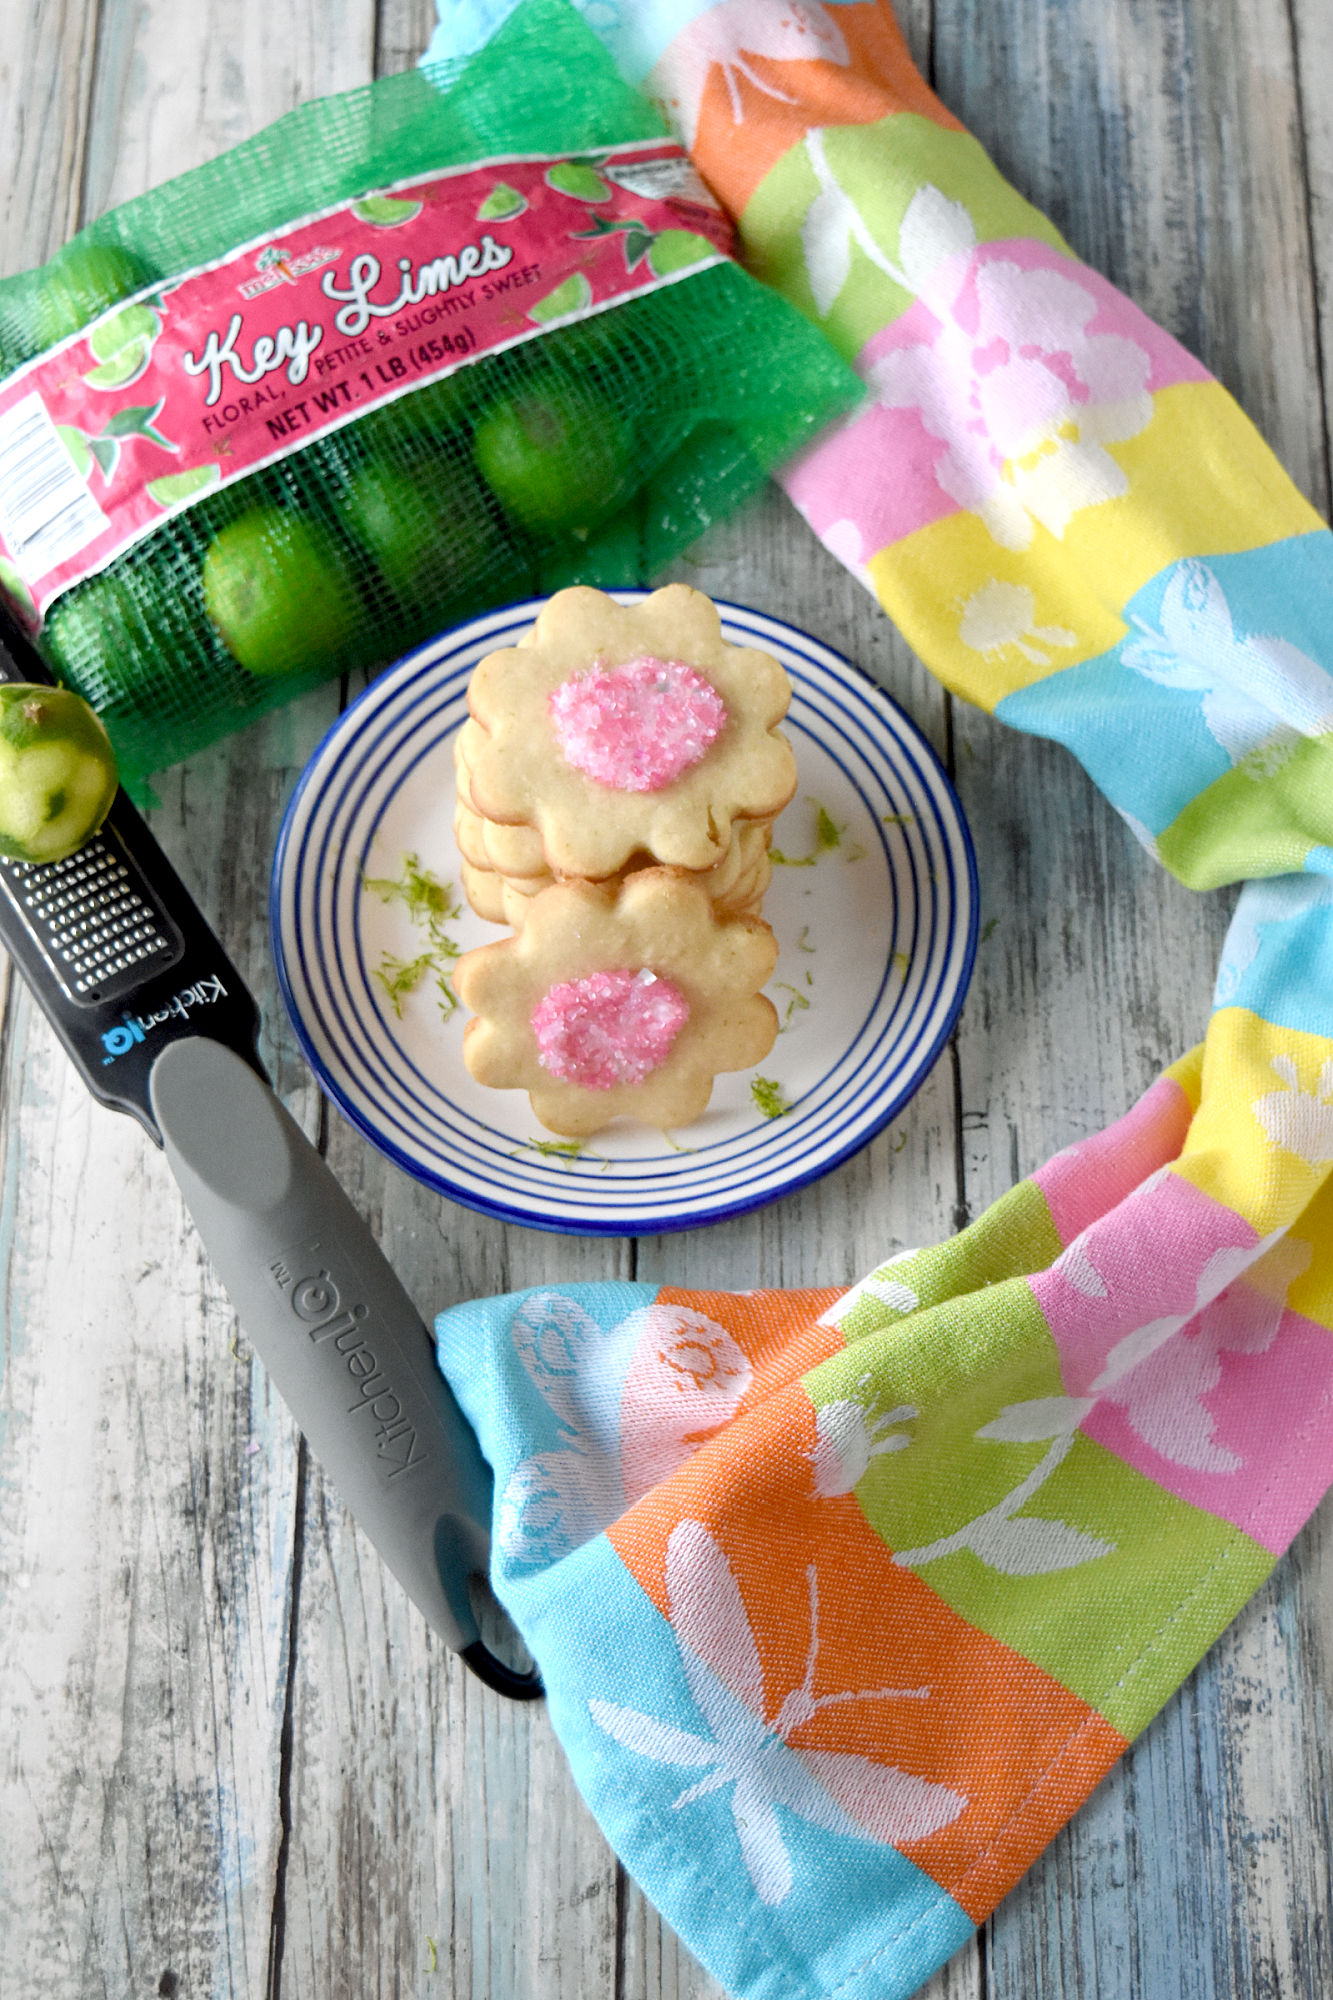 Key Lime Shortbread Cookies are buttery, light, and have a hint of key lime flavor. This dough is simple and quick to whip up in a food processor so you can make these cookies any time you want! #SpringSweetsWeek #cookie #keylime #shortbread